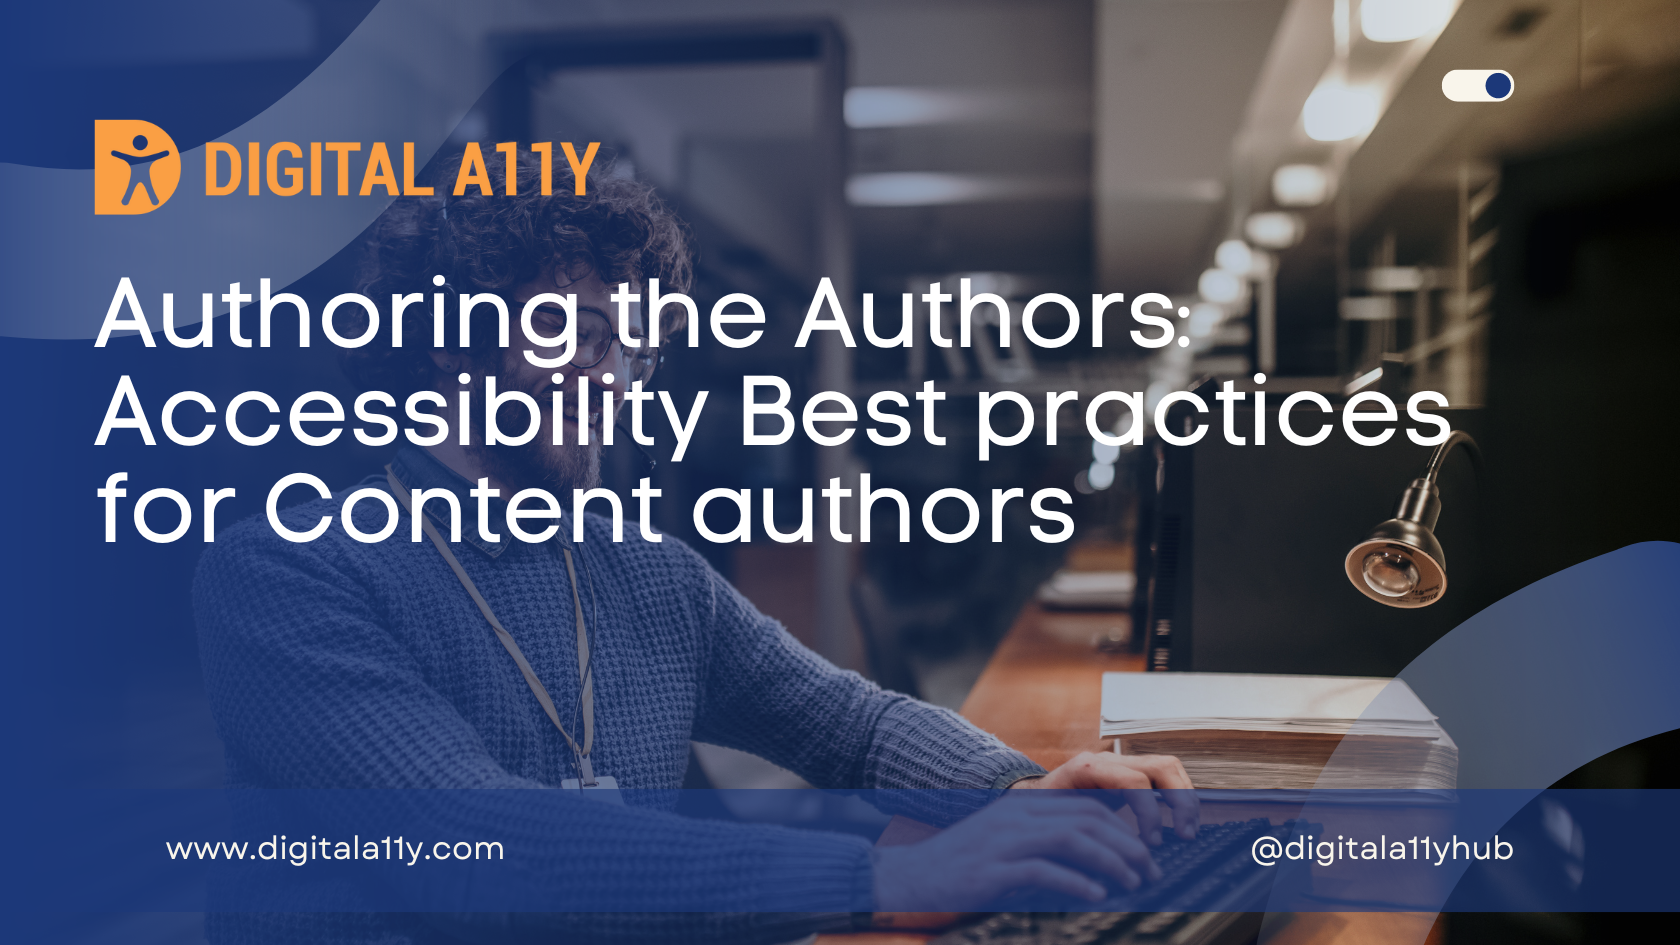 Authoring the Authors: Accessibility Best practices for Content authors